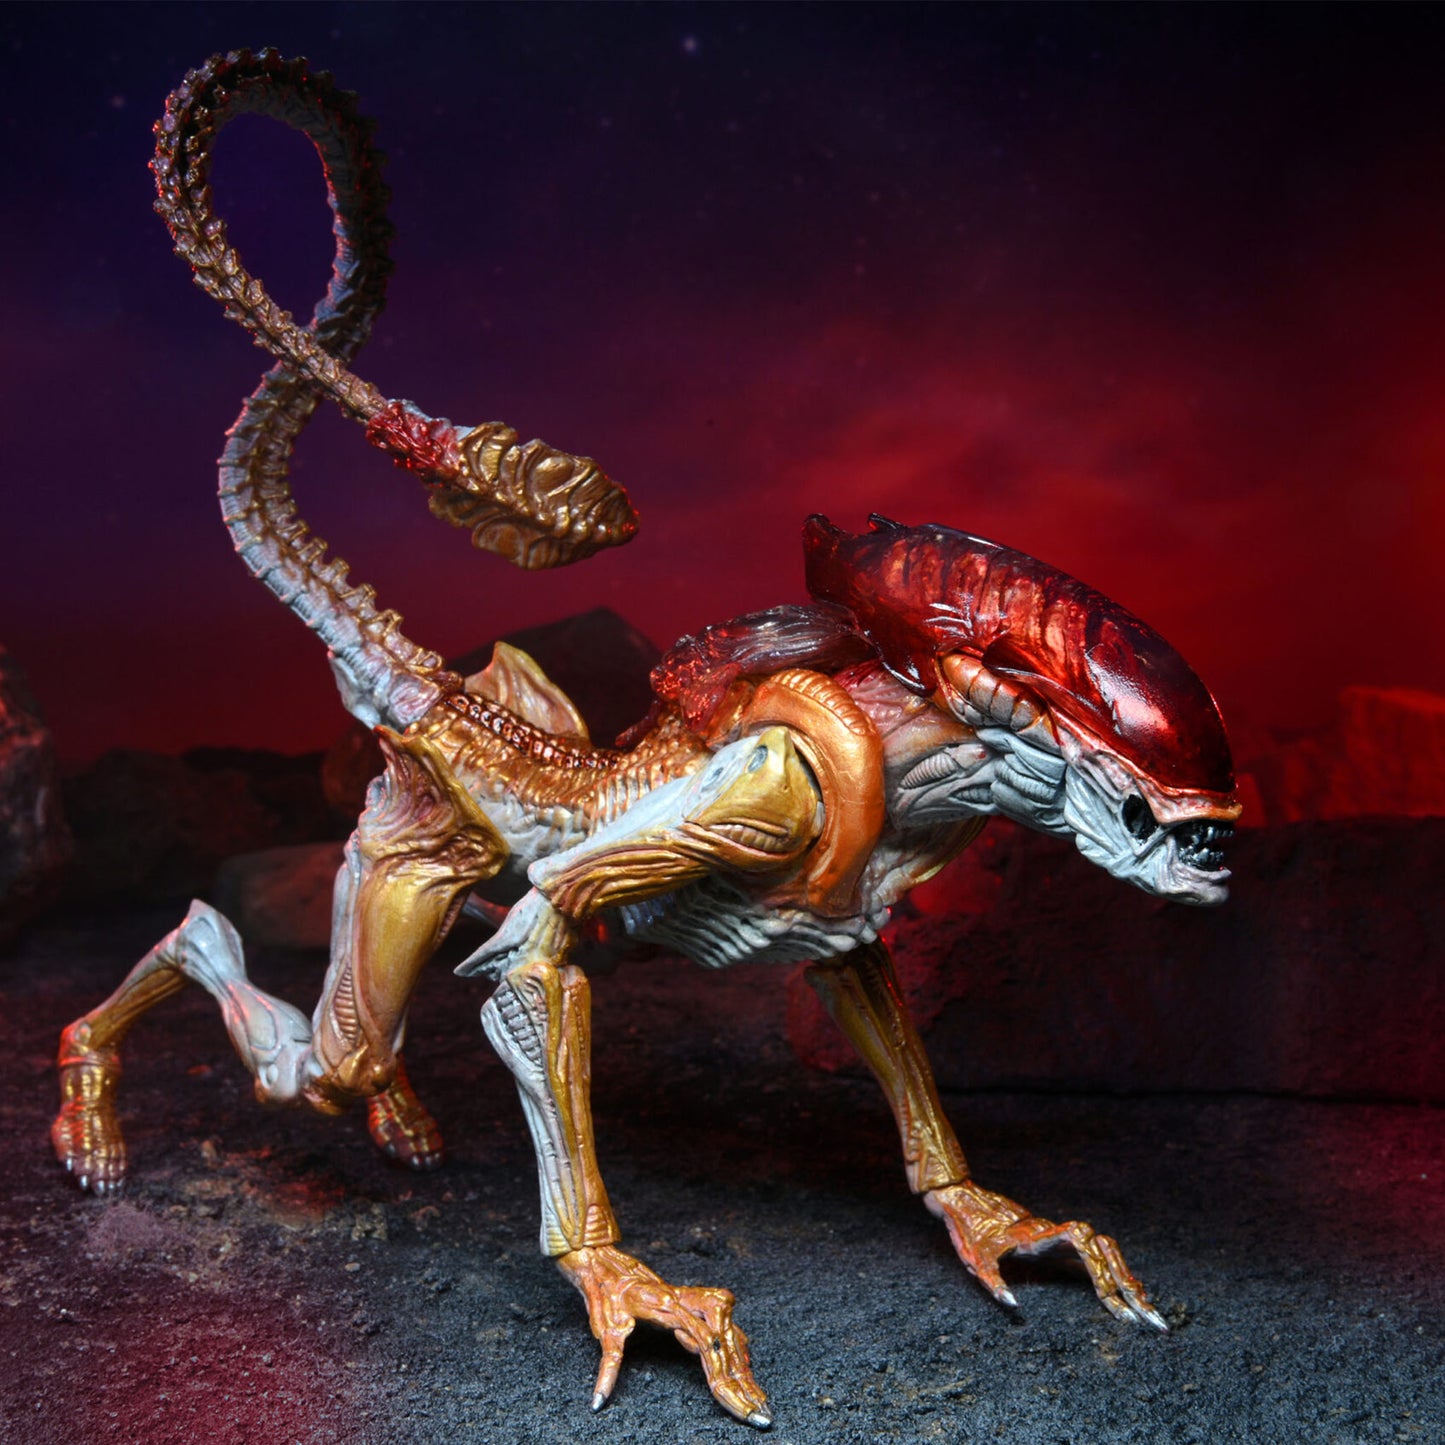 Panther Alien NECA 7" Scale Kenner Tribute Action Figure